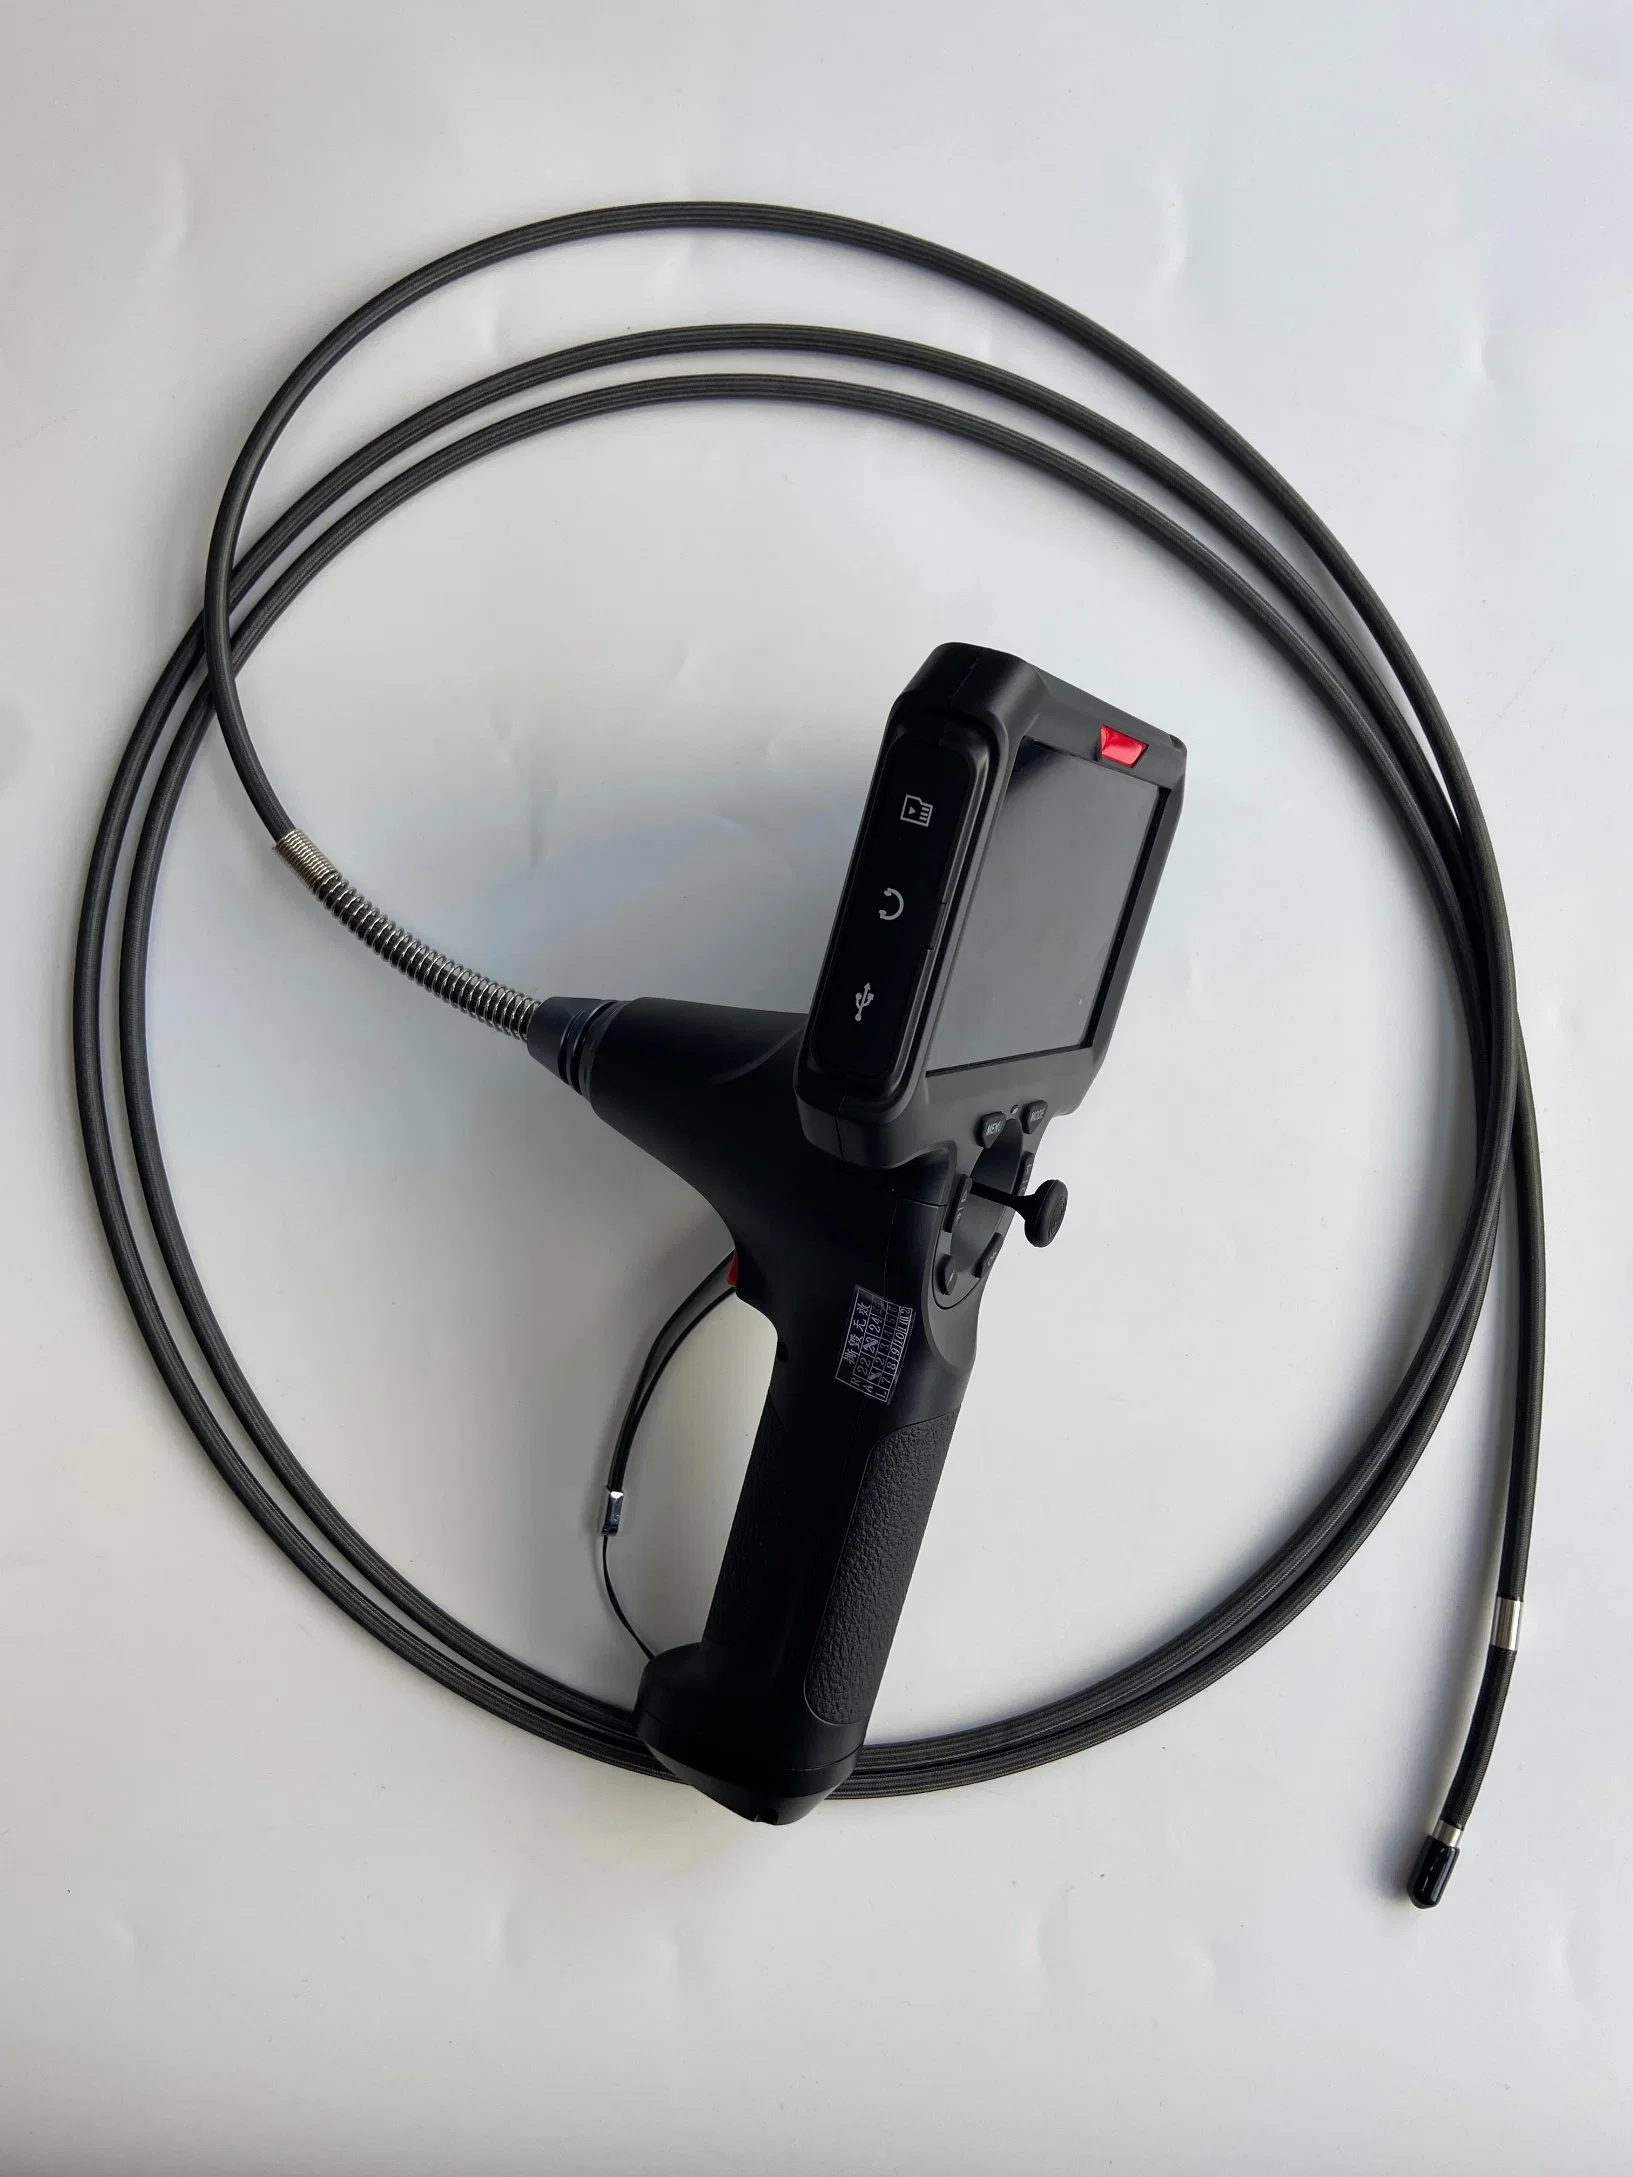 4mm Joystick Rotation Portable Industrial Video Borescope with 5 Inch IPS Monitor, 2m Probe Length, WiFi Function